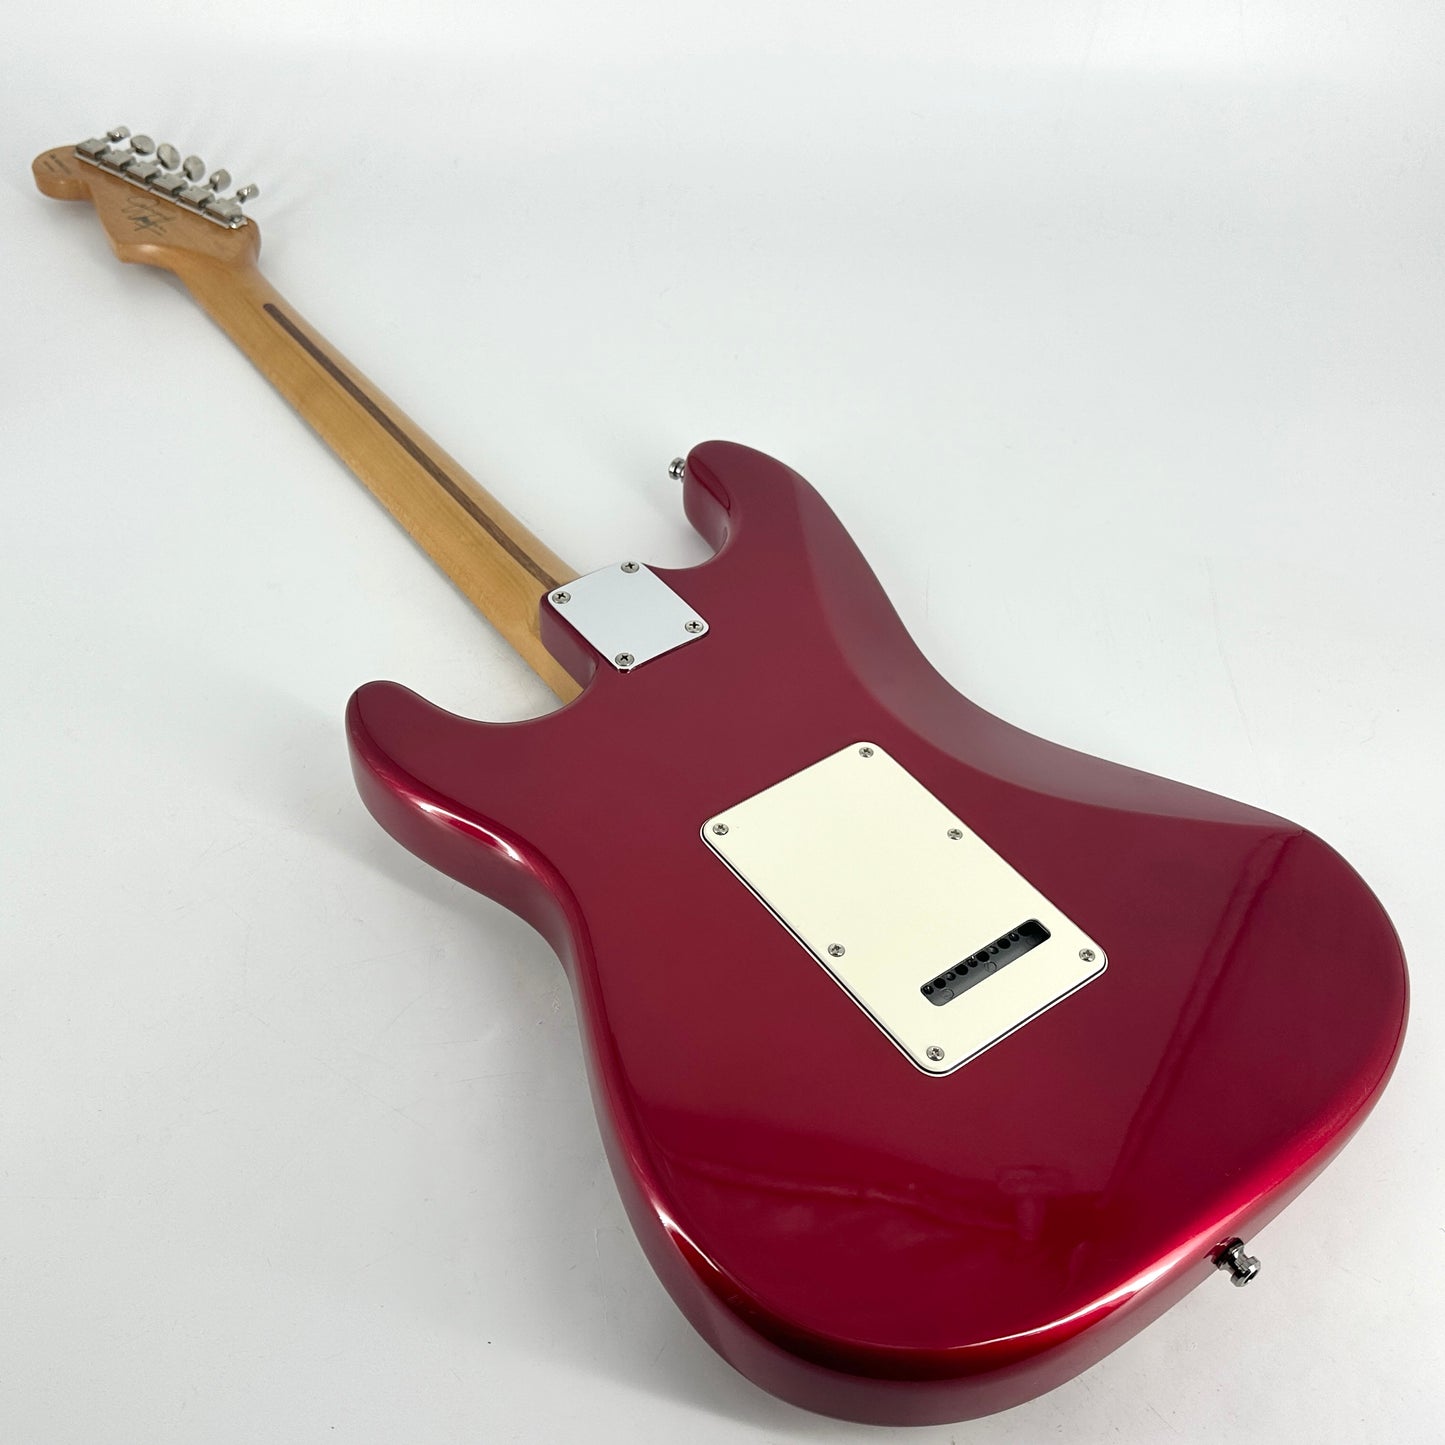 2006 Fender Jimmie Vaughan Tex-Mex Stratocaster – Candy Apple Red